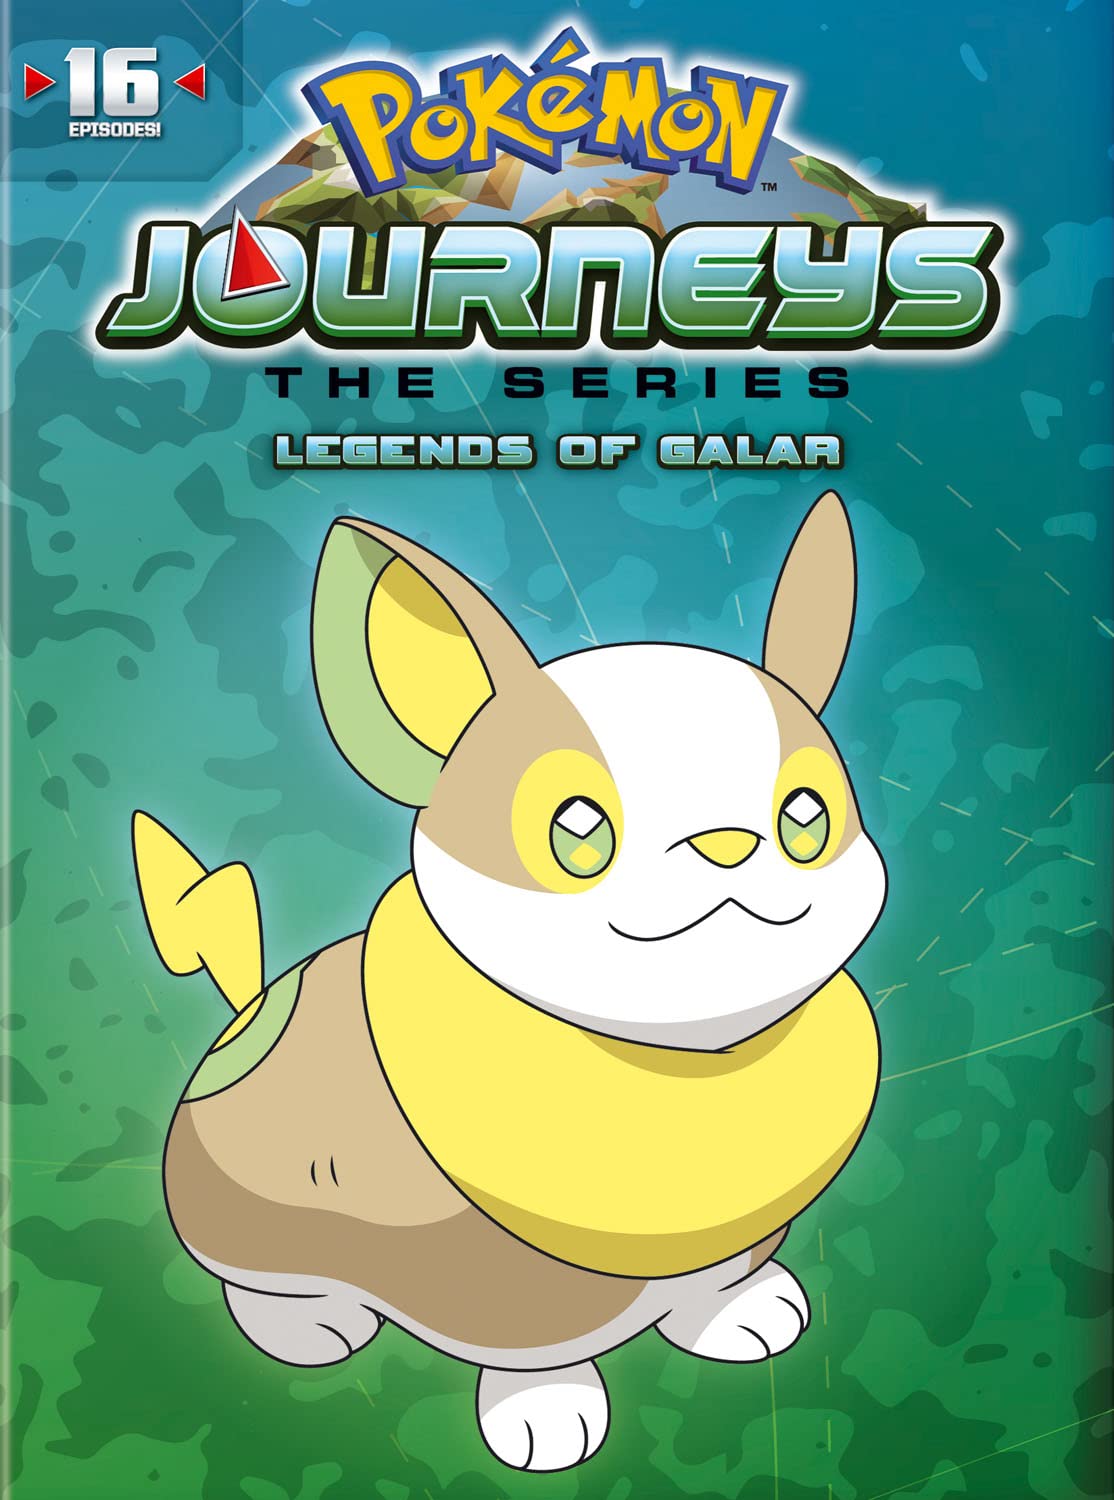 Final episodes of Pokemon Journeys: The Series will release in